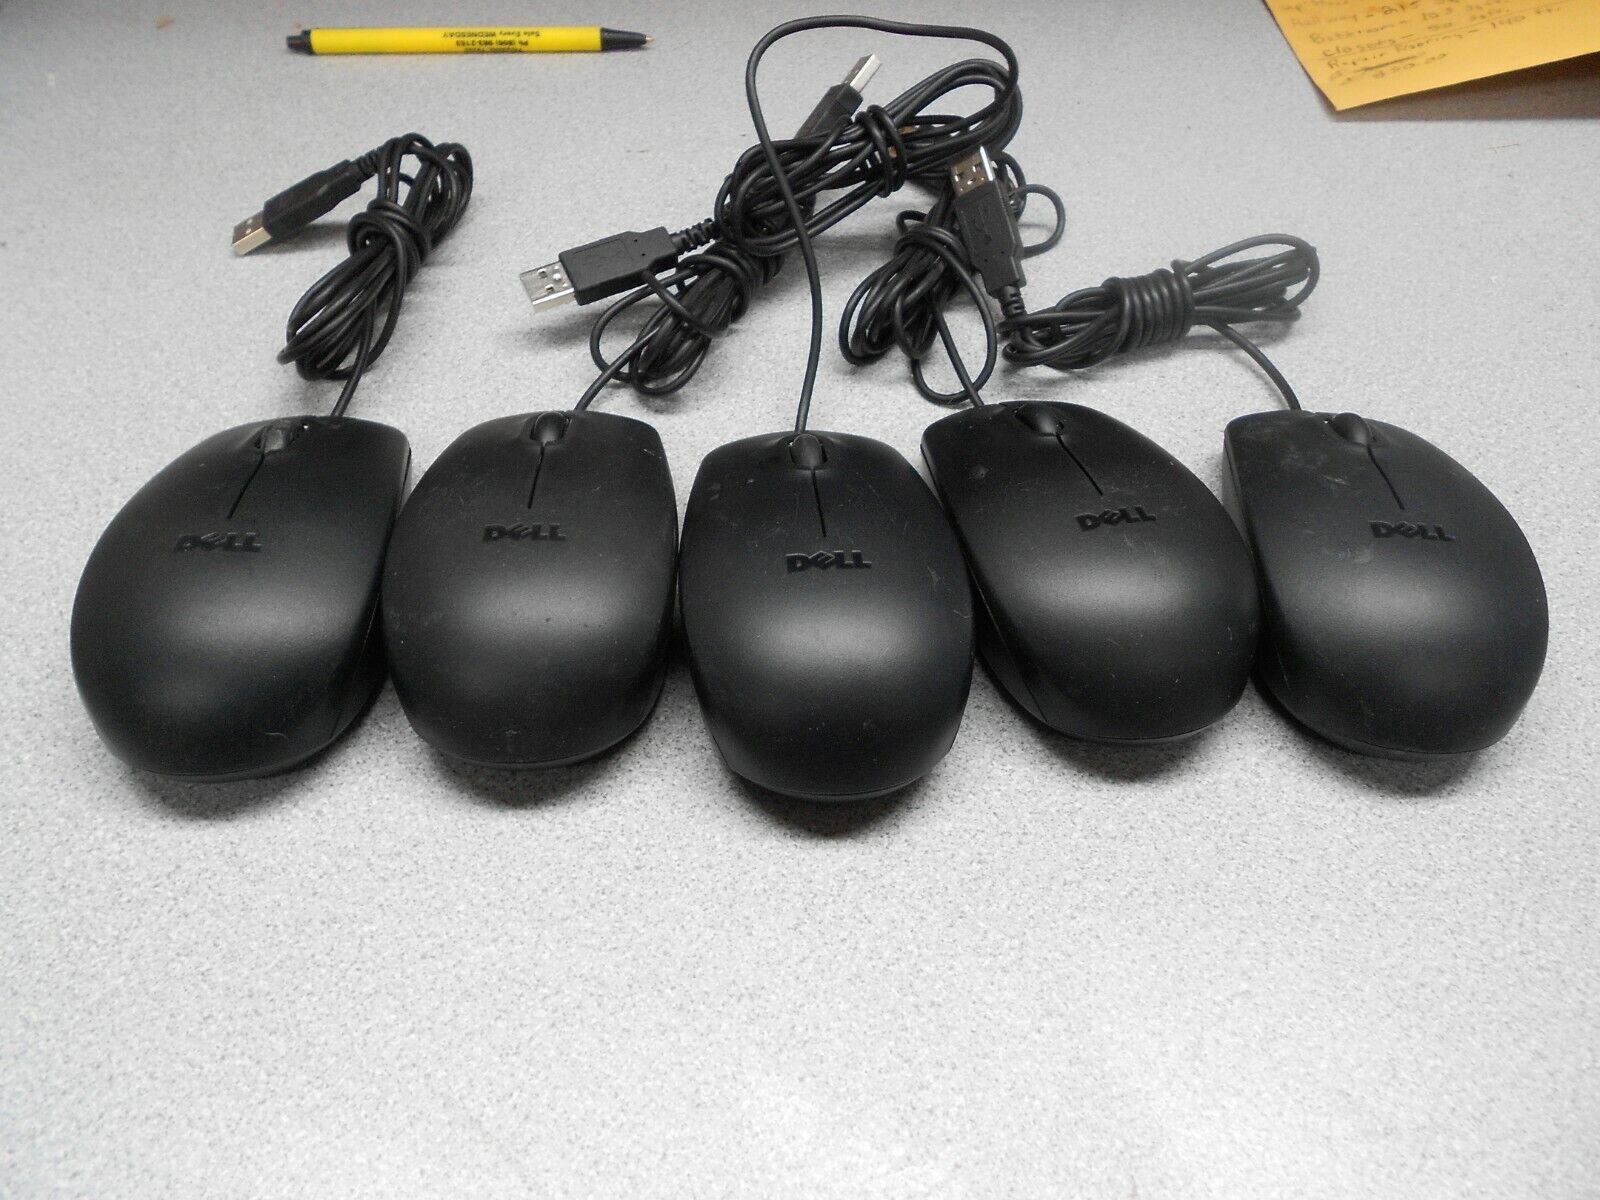   Genuine Dell Black Wired USB Optical Scroll Mouse MS111-L Pre Owned 5X 